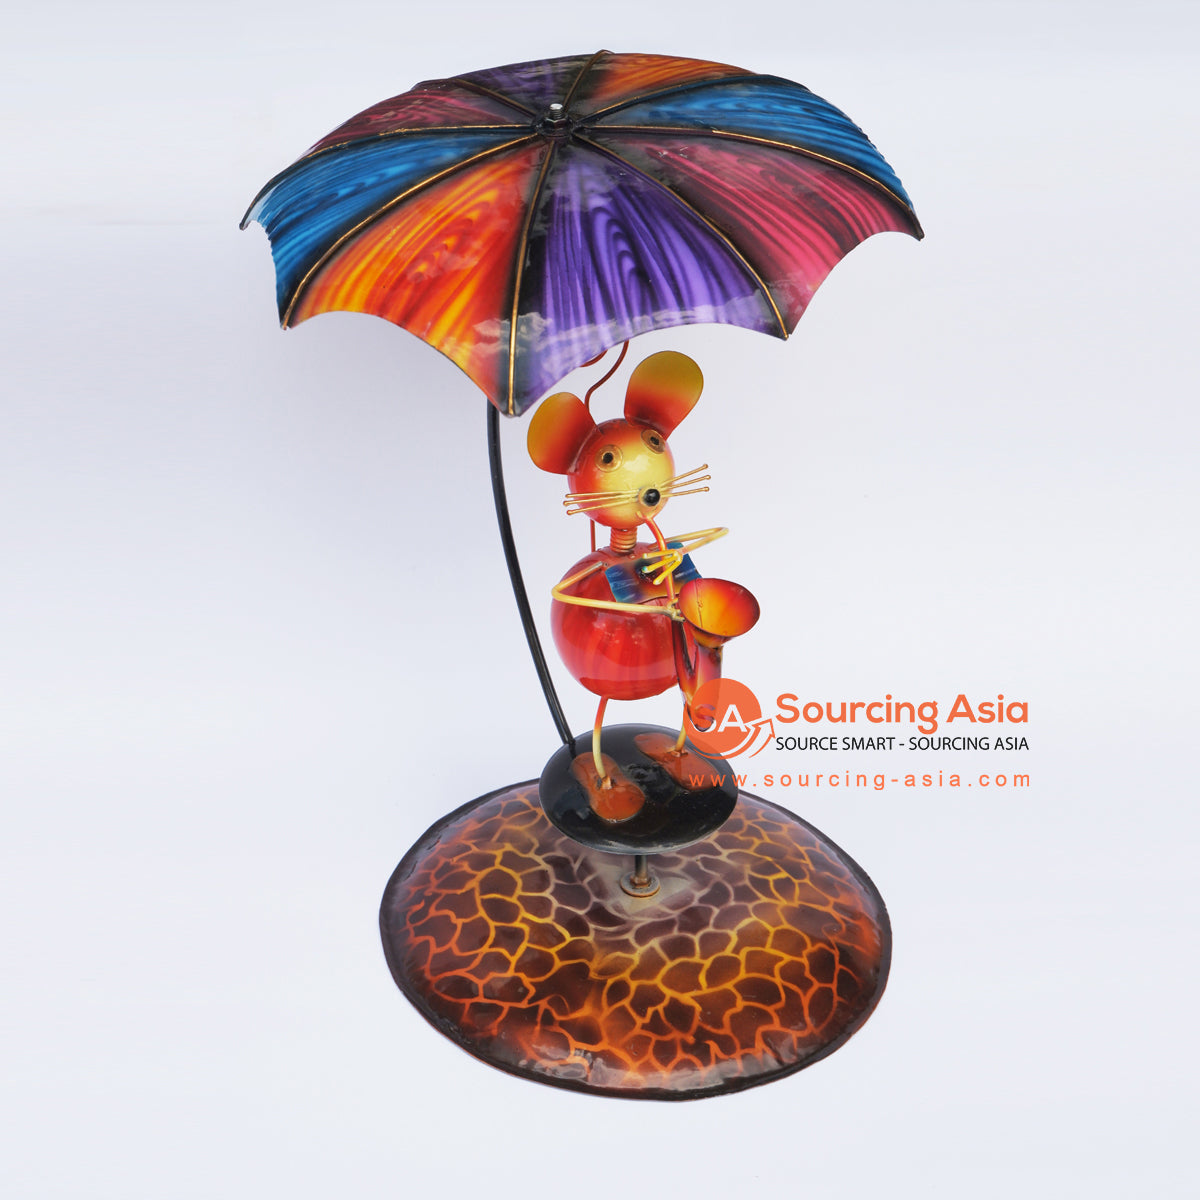 PEBC154 AIRBRUSHED PAINTED METAL DECOR MOUSE PLAYING TRUMPET UNDER THE UMBRELLA DECORATION